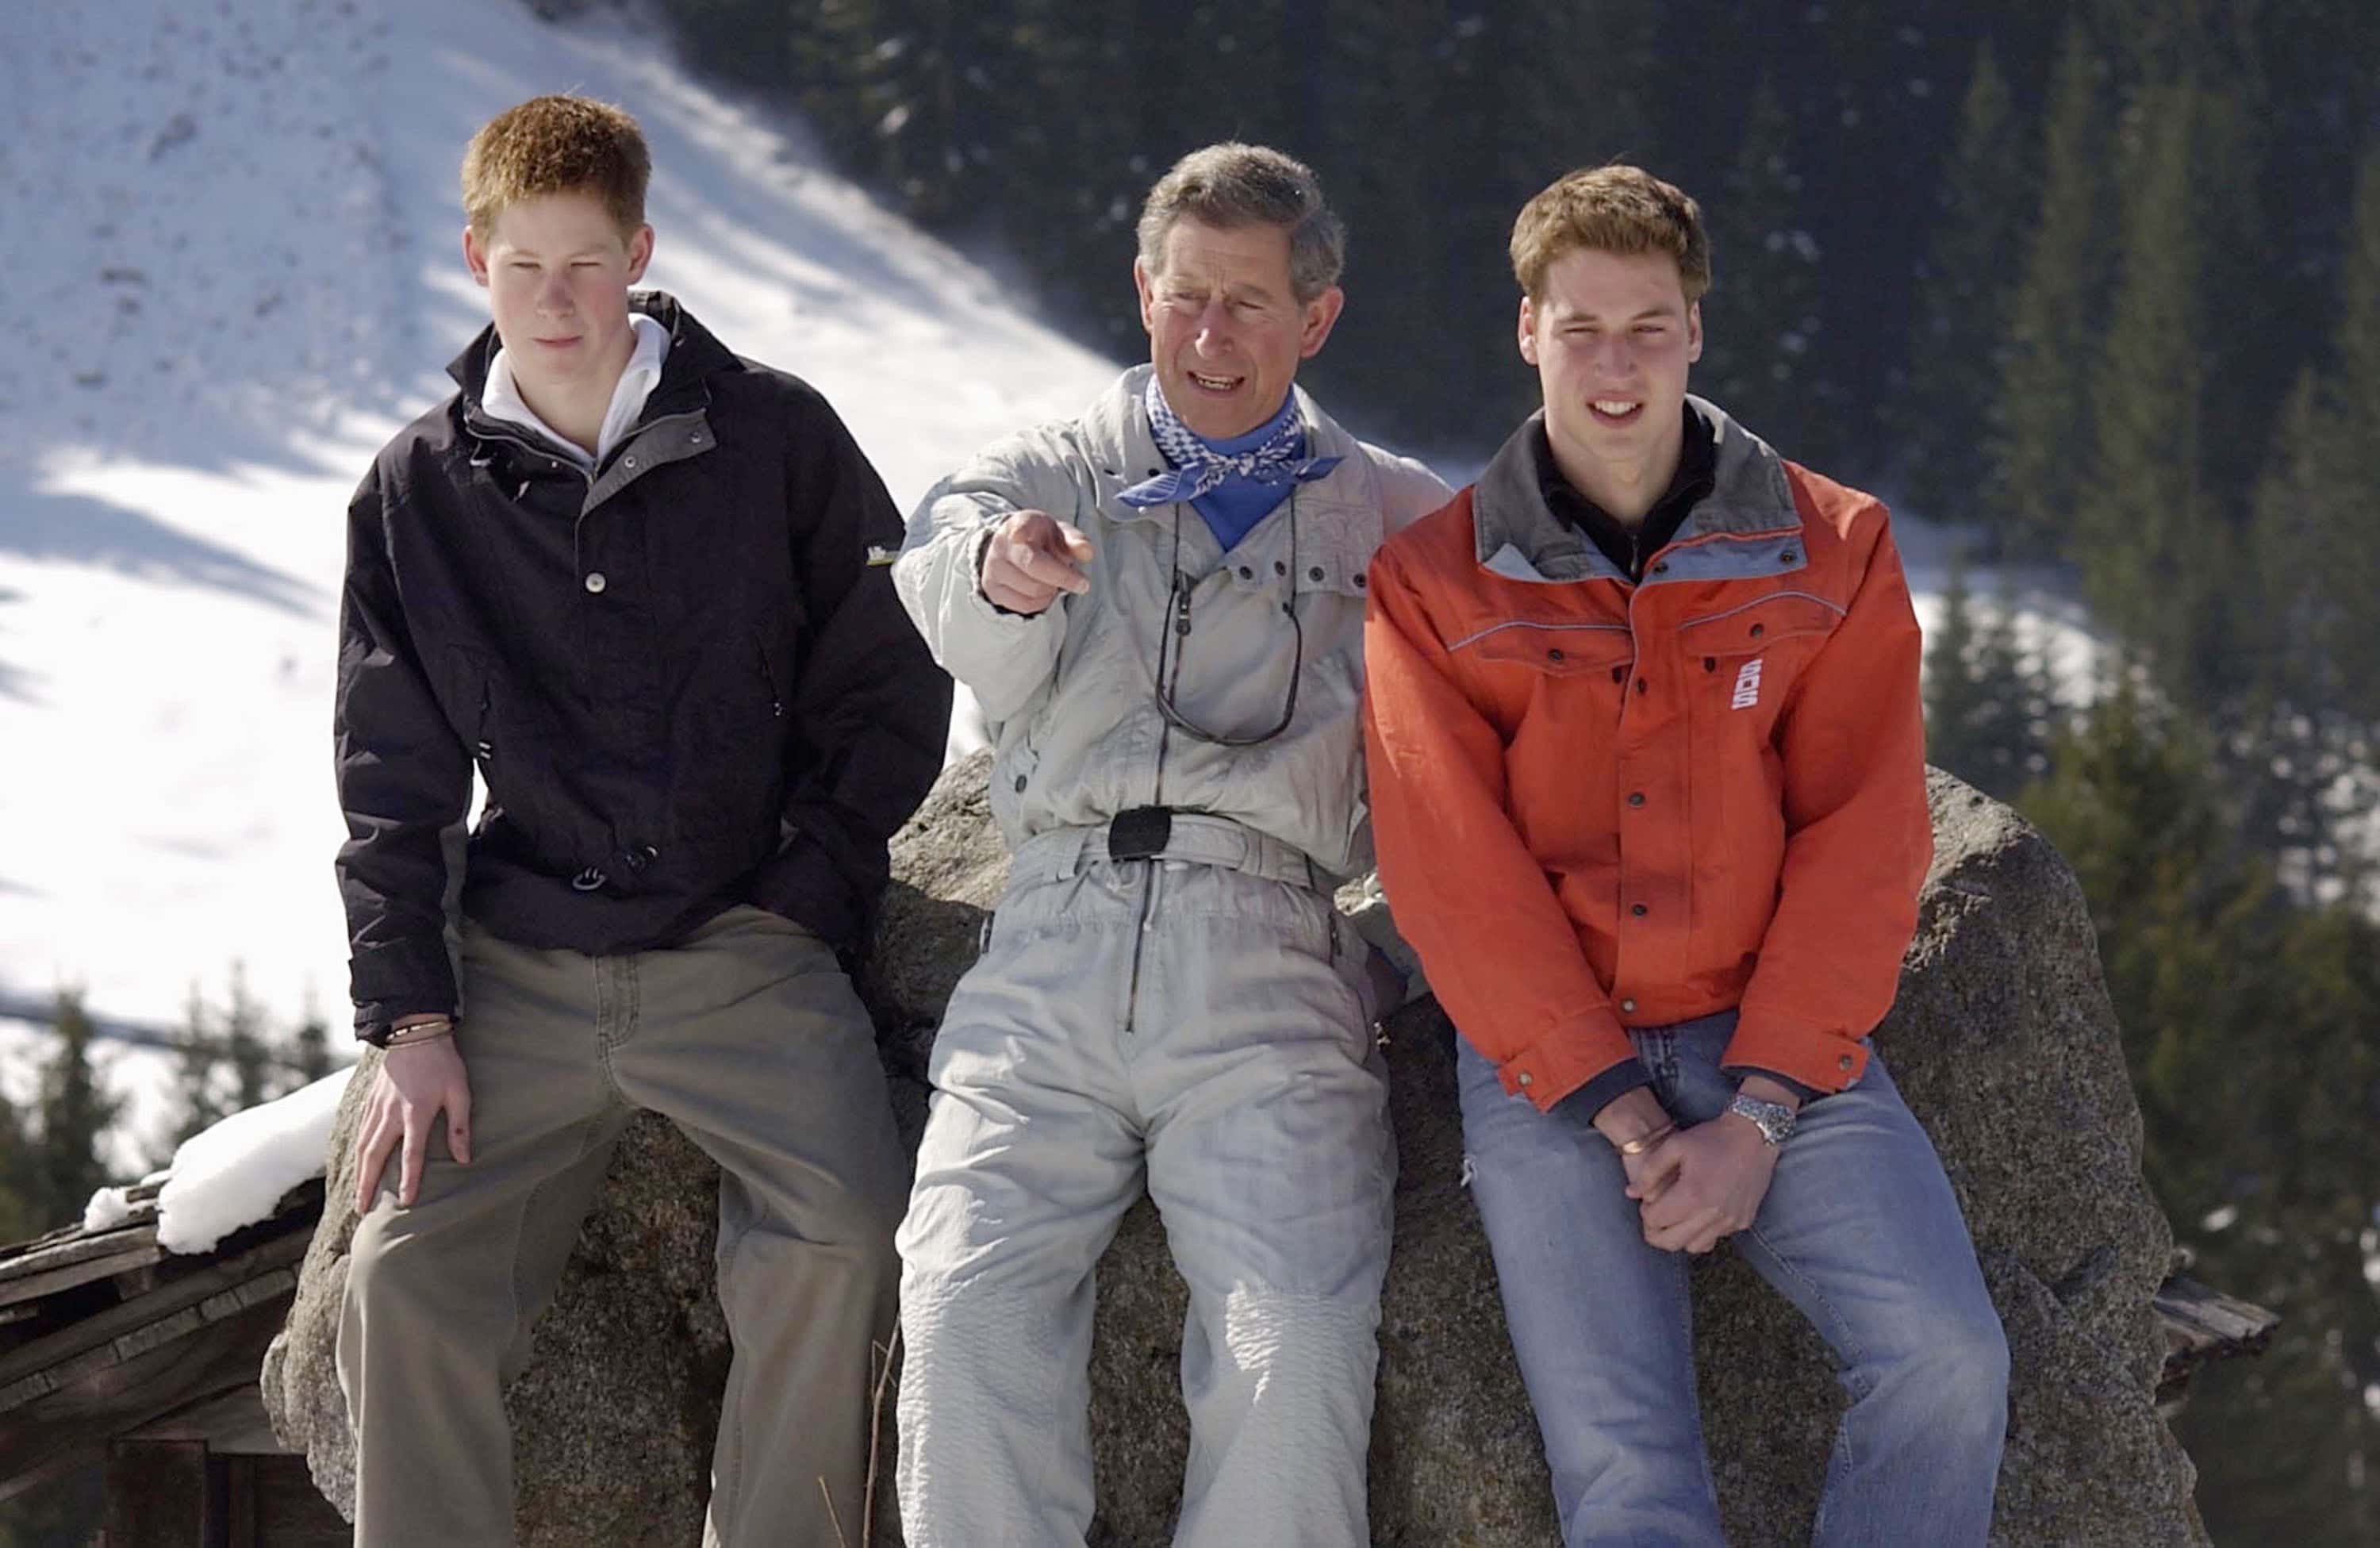 Britain's Prince Charles on Holiday with Prince William and Prince Harry.